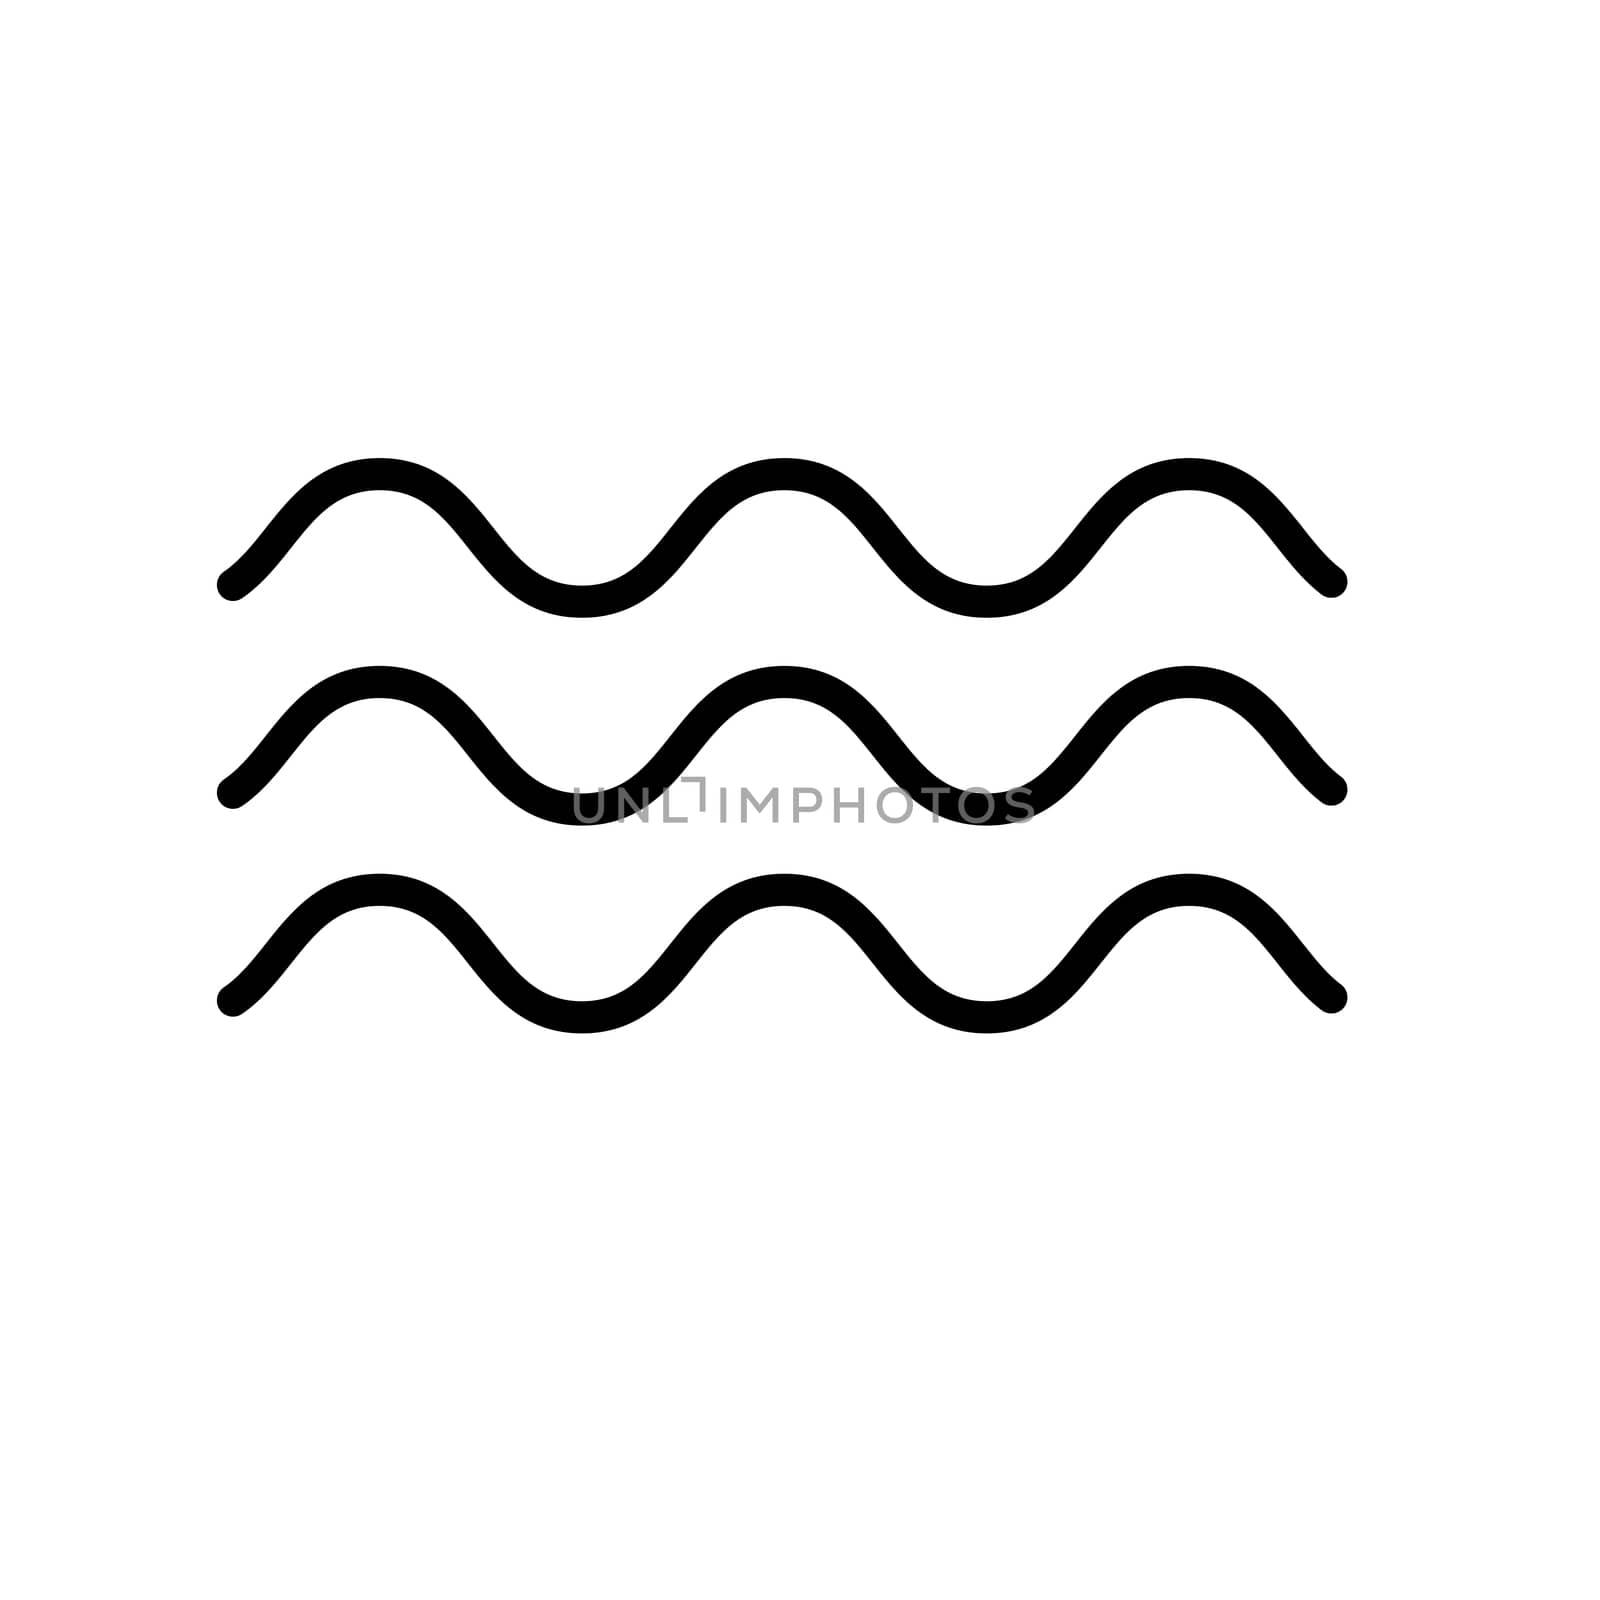 wave icon on white background. flat style. wave icon for your we by suthee